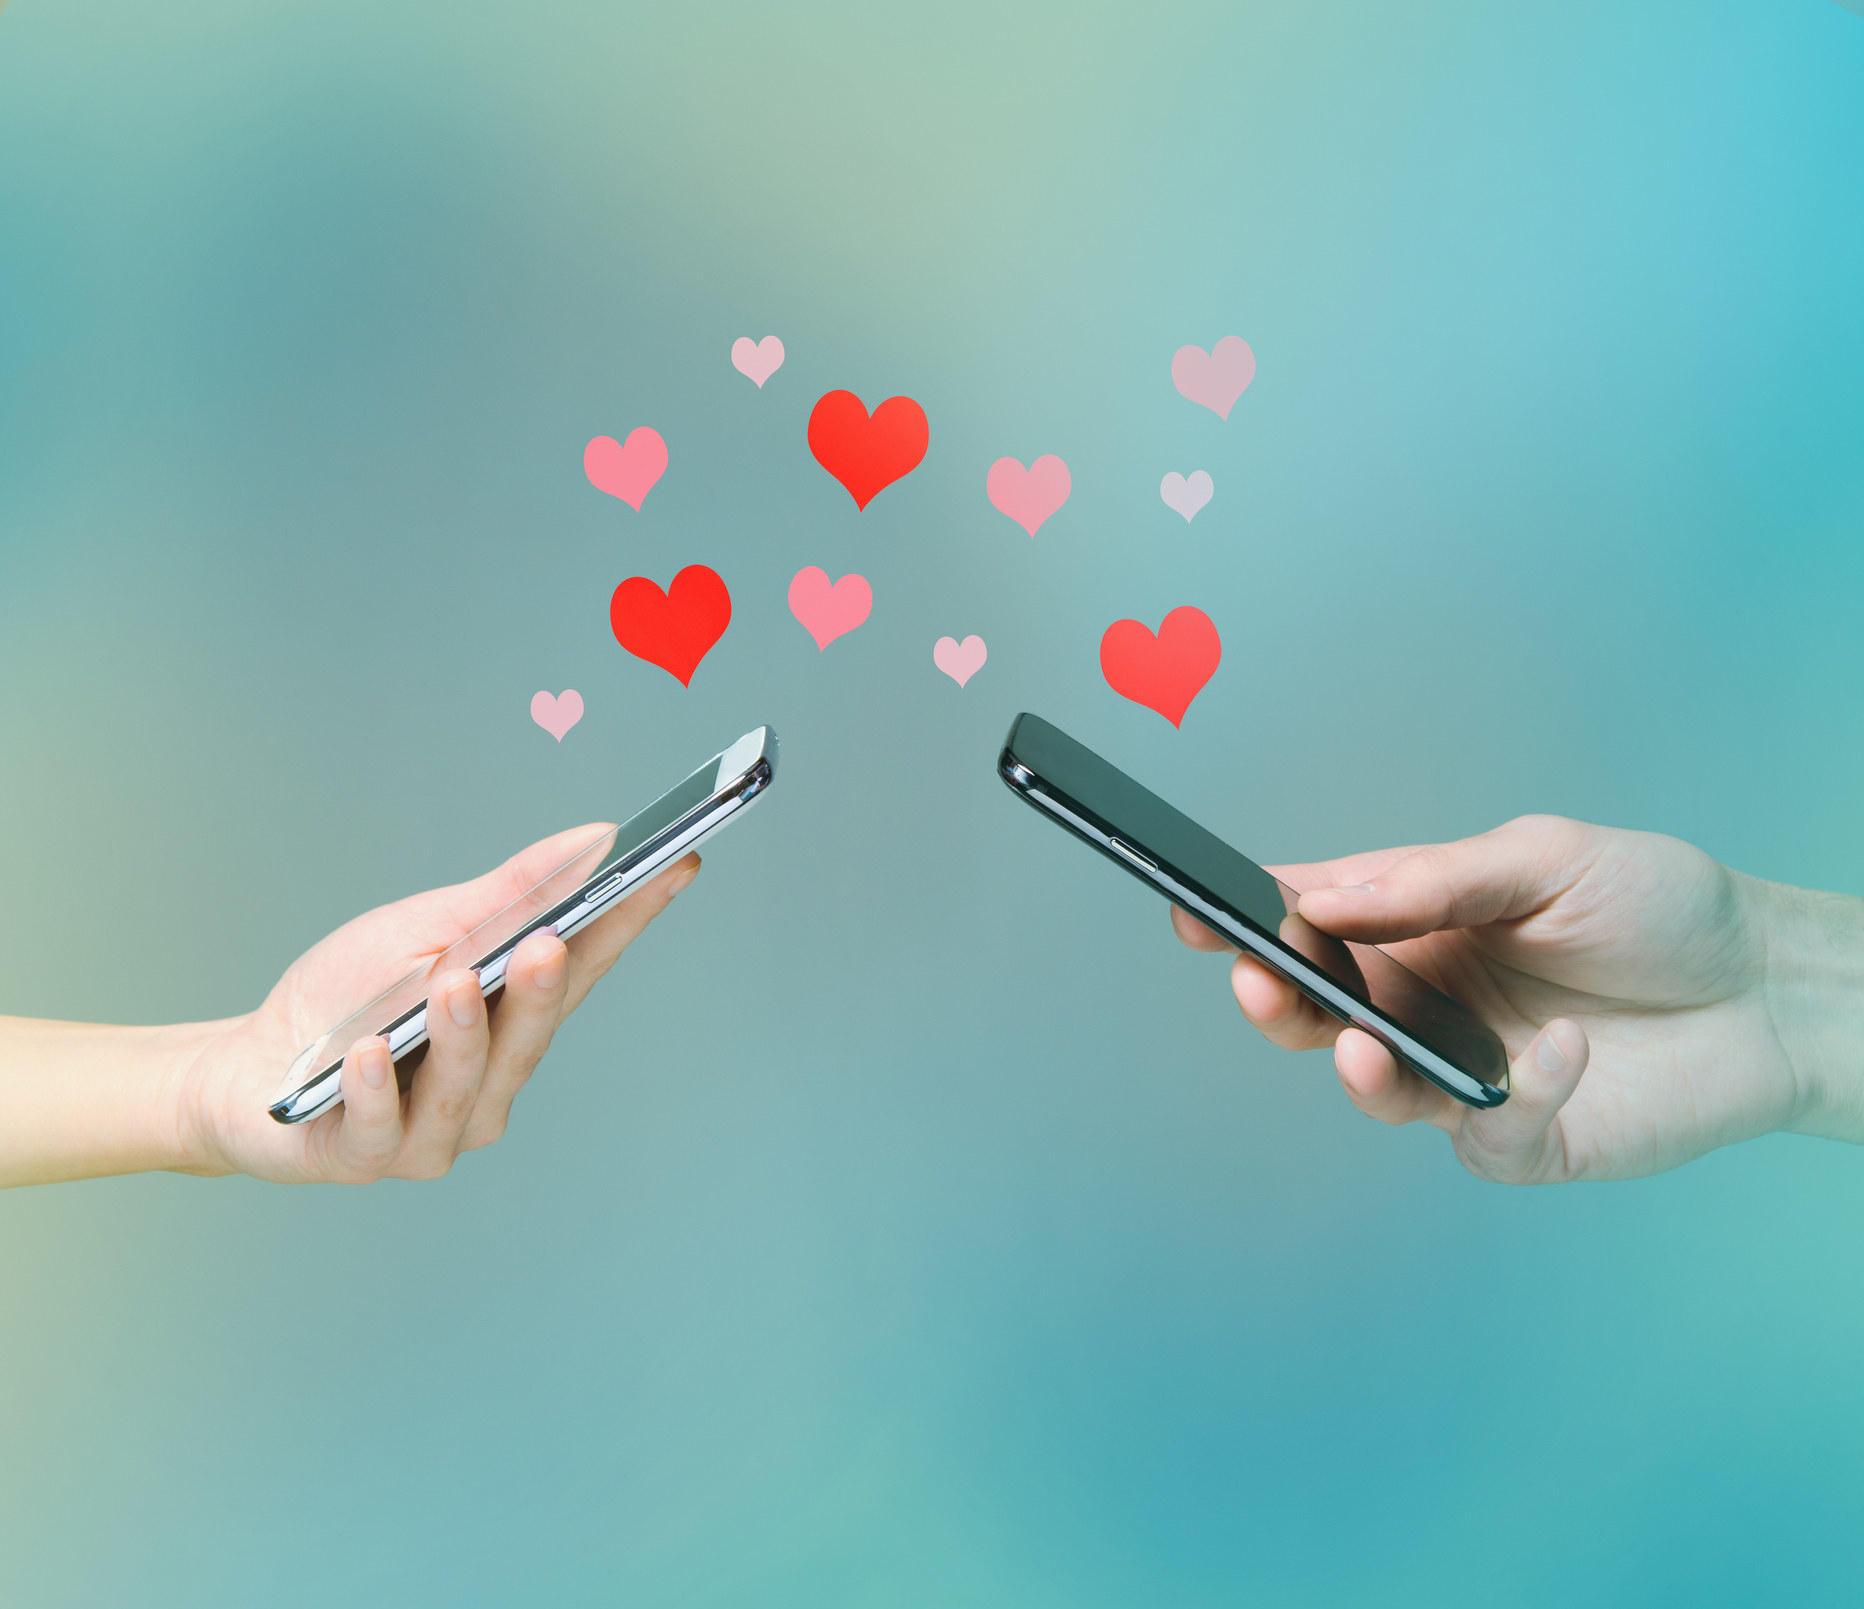 hands holding cell phones with hearts between them